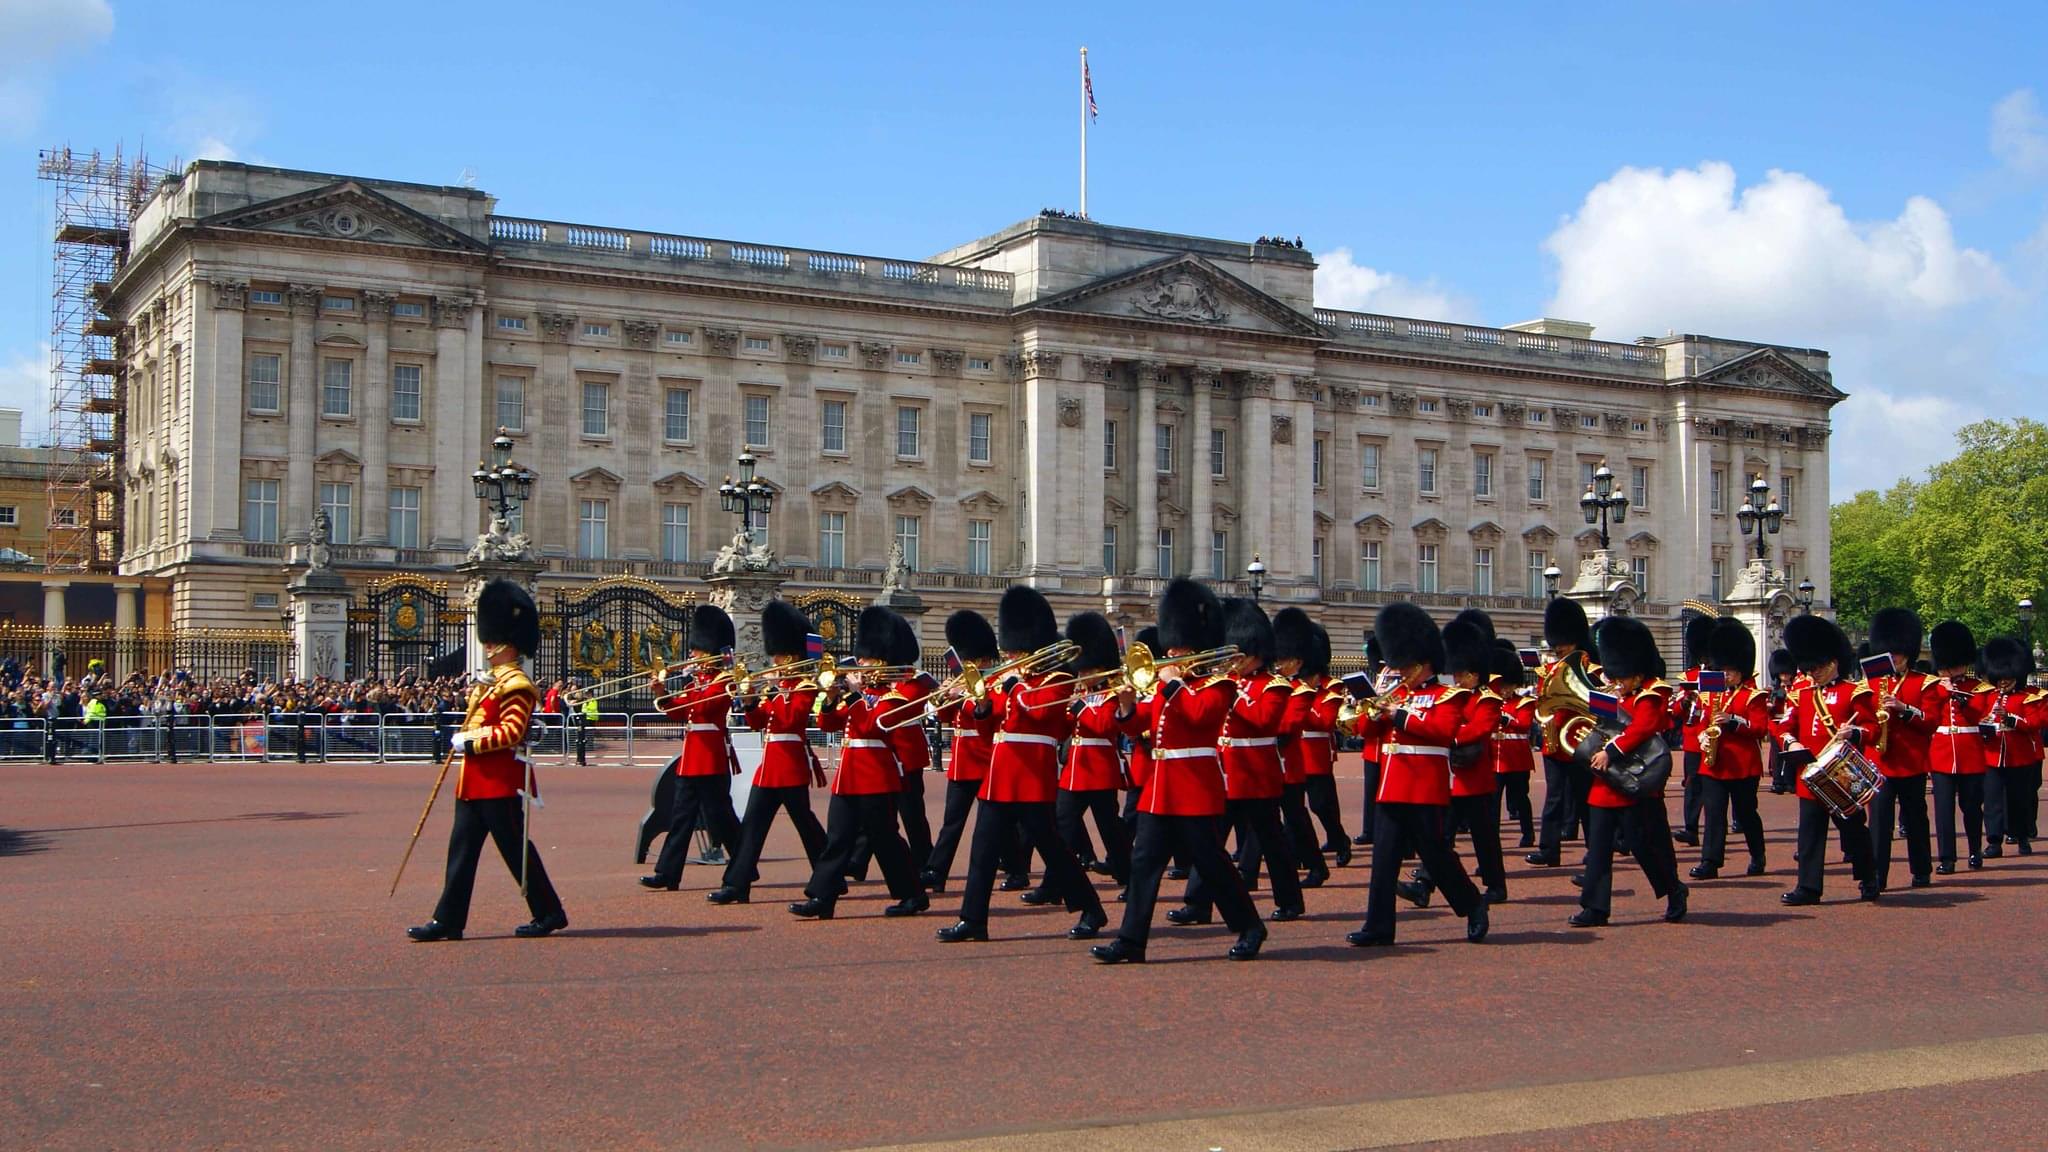 Watch the Changing of the Buckingham Palace Guards